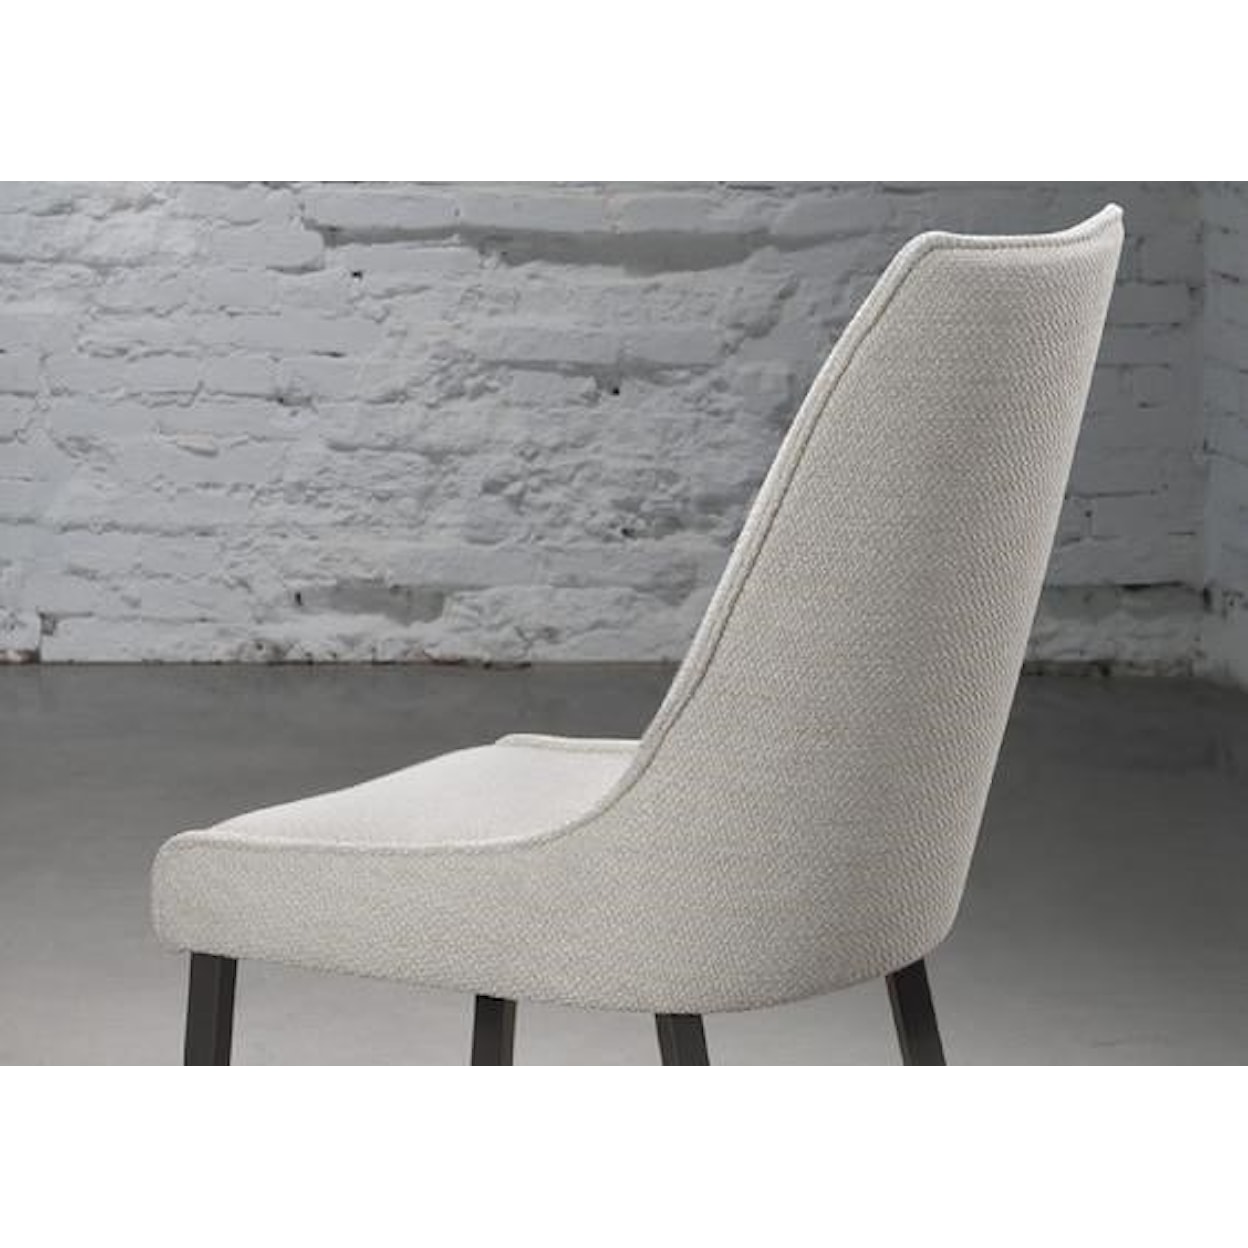 Trica Olivia Side Chair